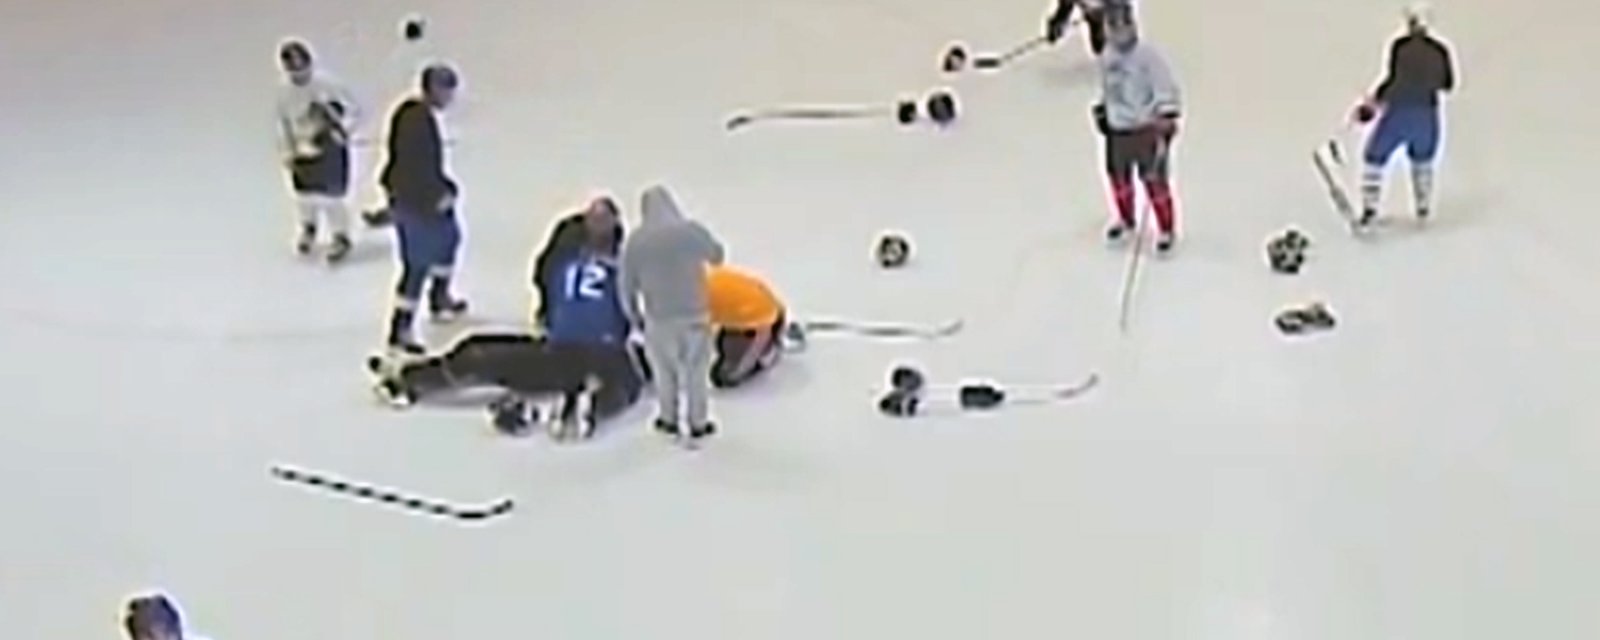 Doctor saves life of fellow beer leaguer by performing CPR on ice